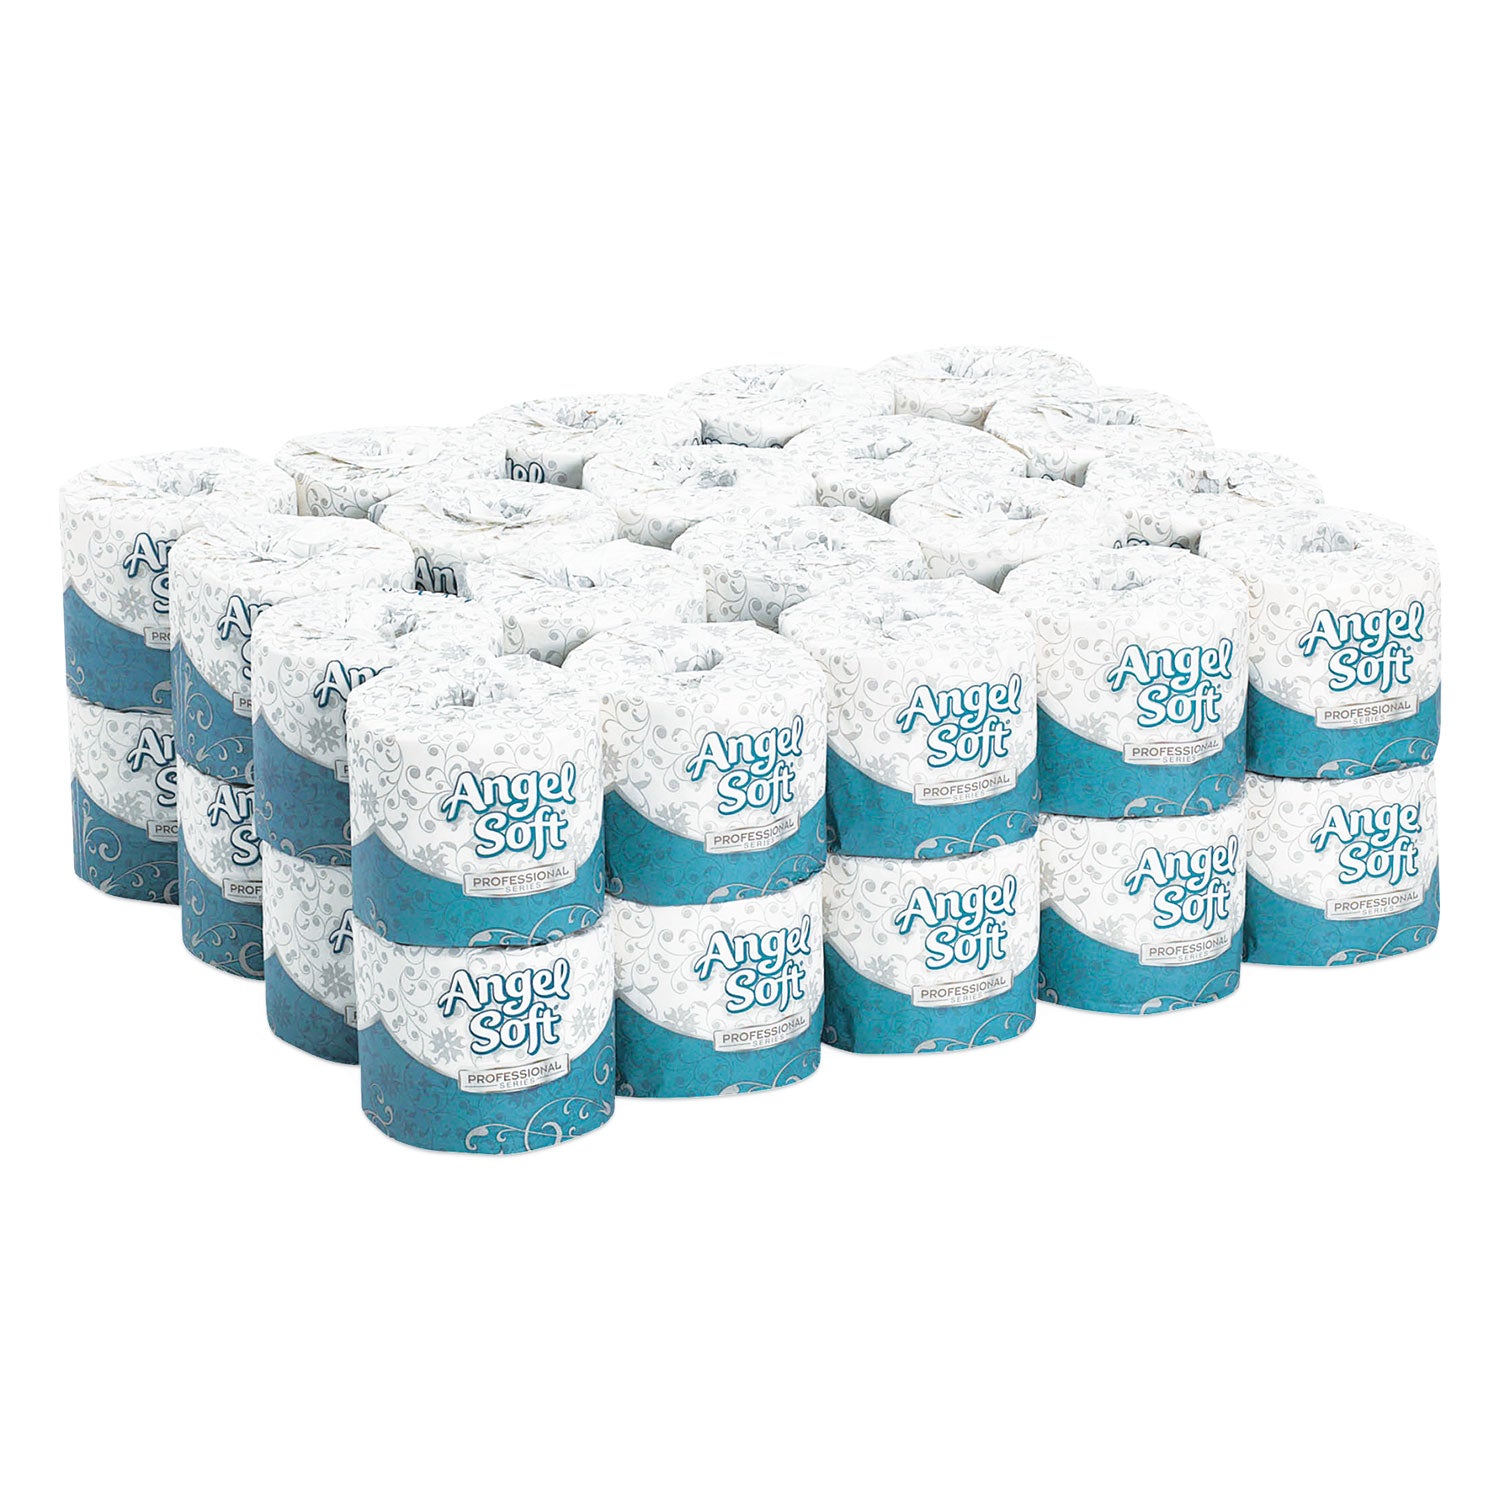 Angel Soft ps Premium Bathroom Tissue, Septic Safe, 2-Ply, White, 450 Sheets/Roll, 40 Rolls/Carton - 